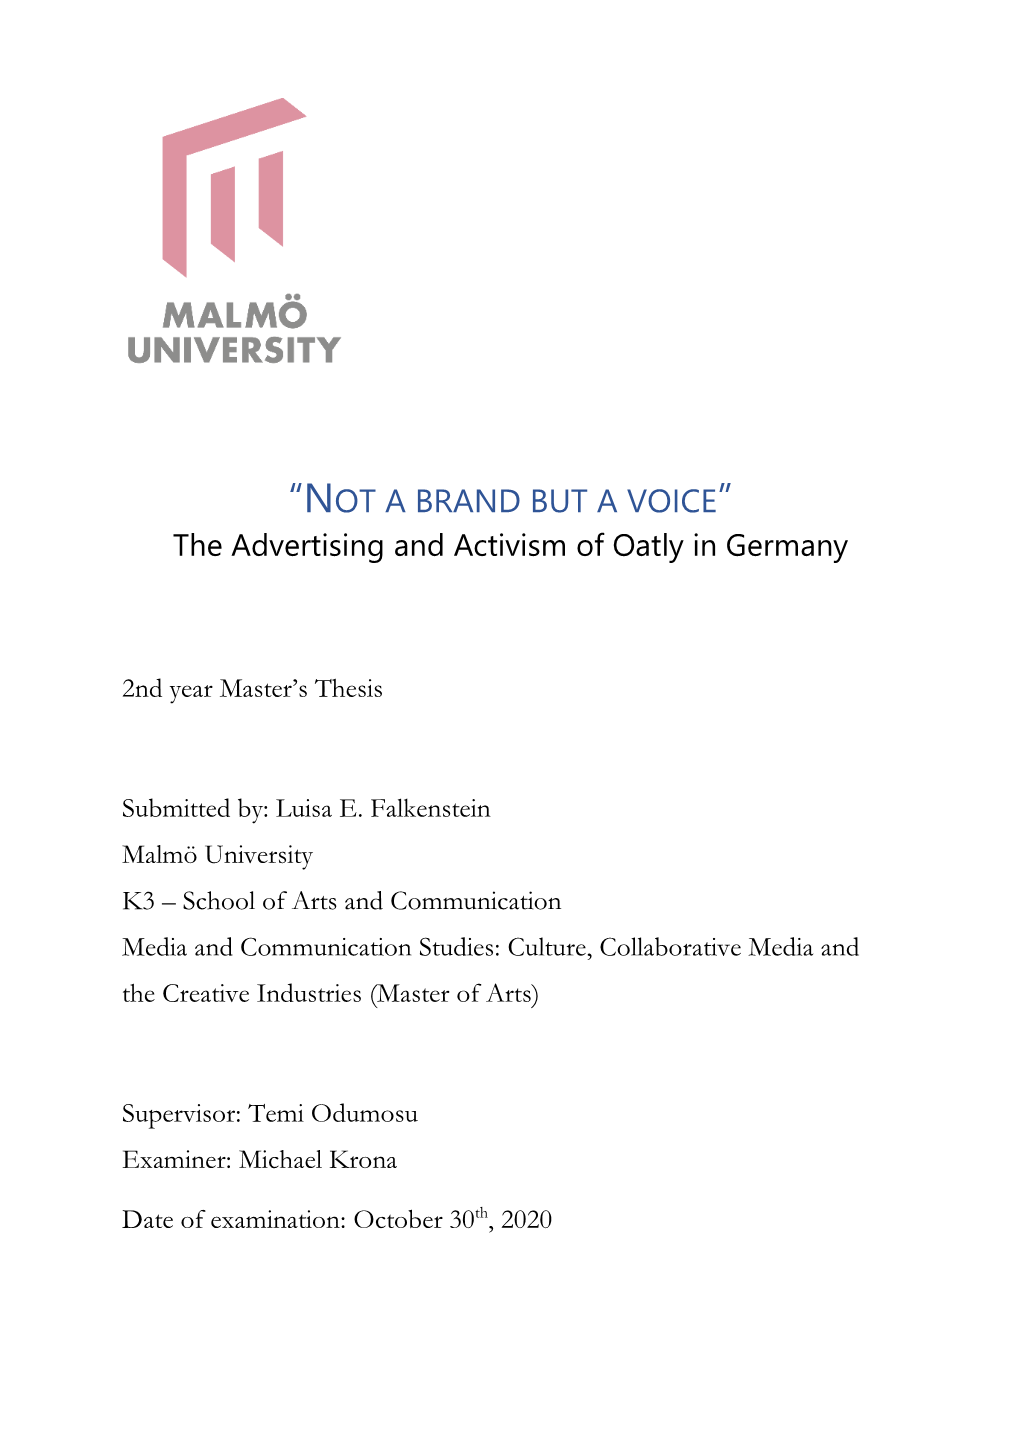 “NOT a BRAND but a VOICE” the Advertising and Activism of Oatly in Germany